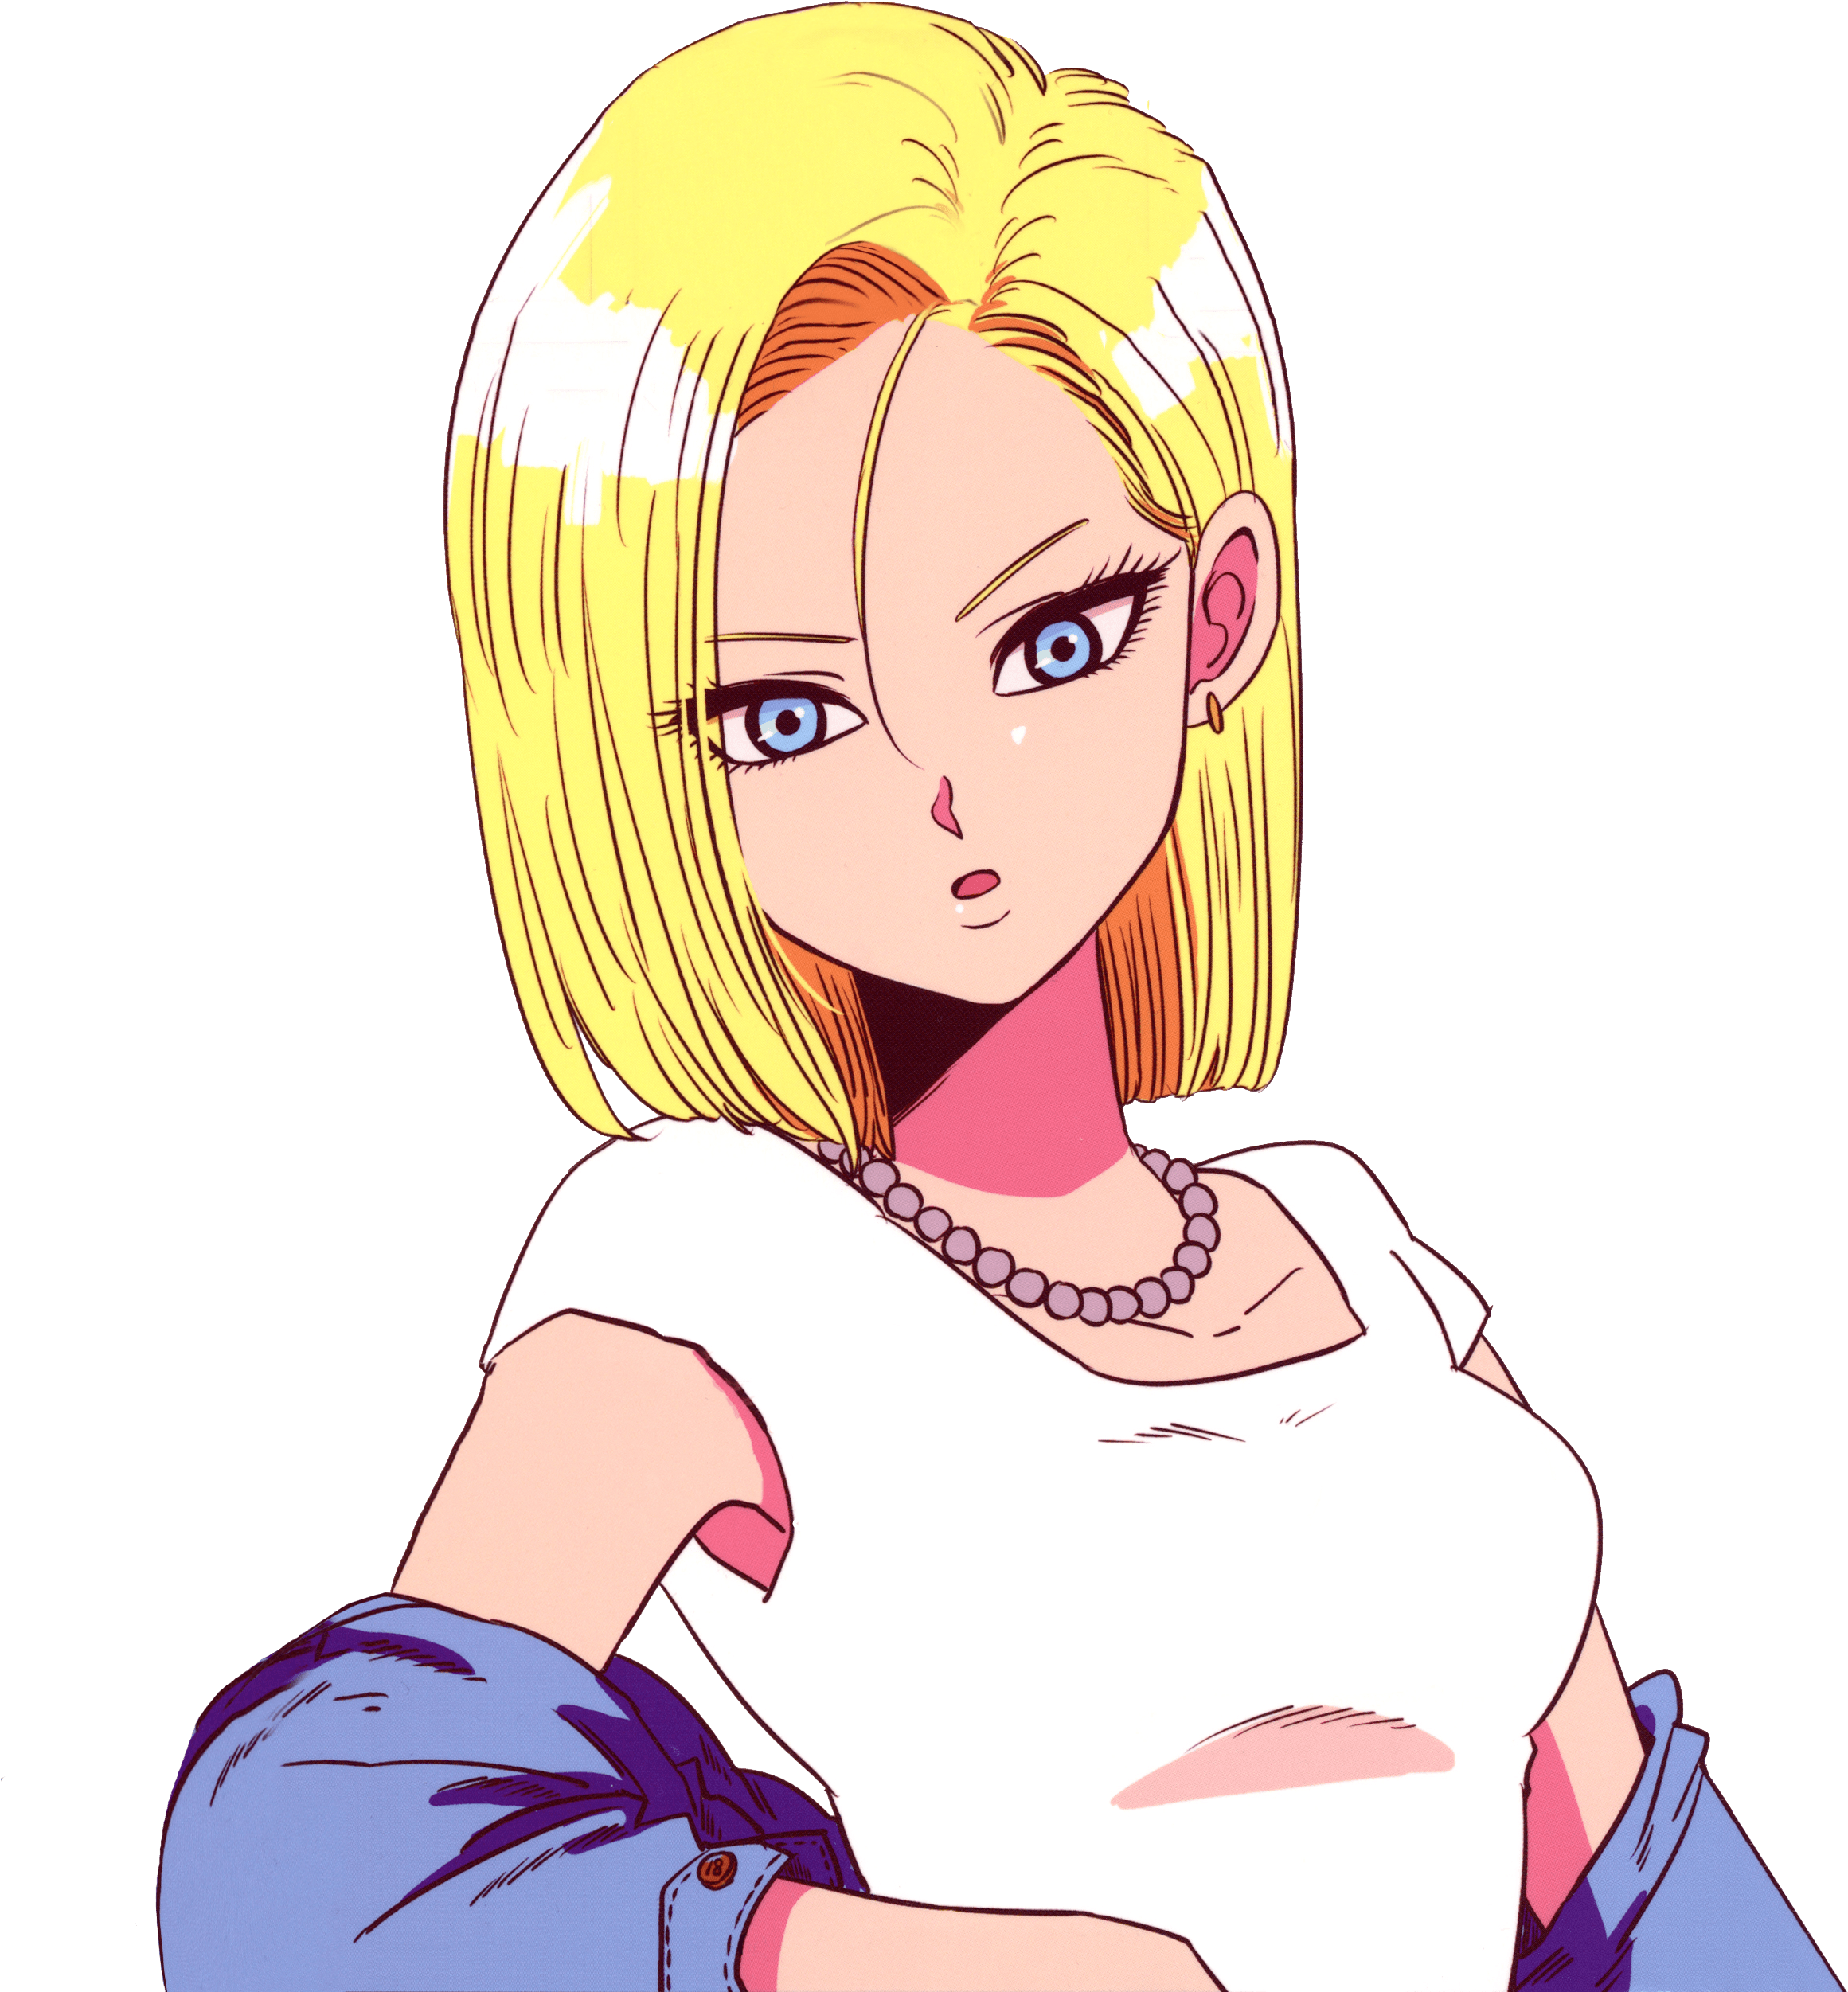 Free Download - Android 18 Manga Covers Clipart - Large Size Png Image - Pi...